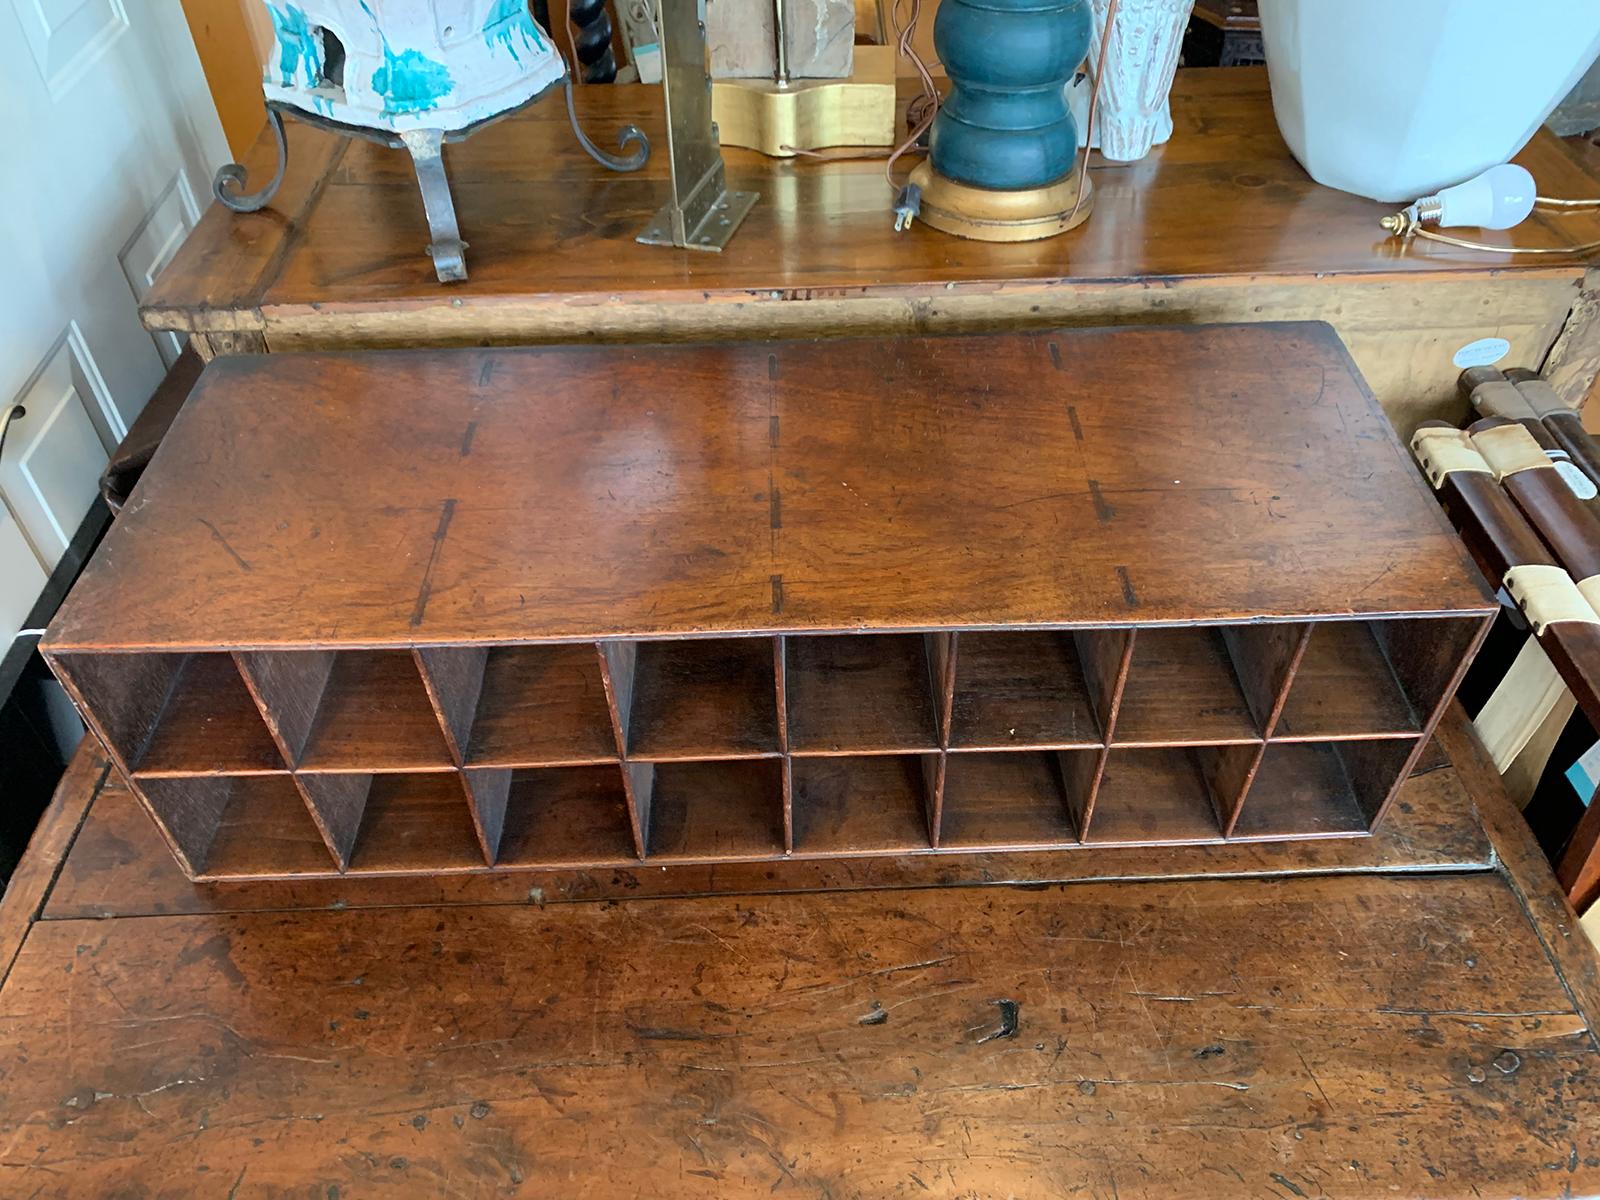 19th Century Wood Organizer with 16 Compartments In Good Condition For Sale In Atlanta, GA